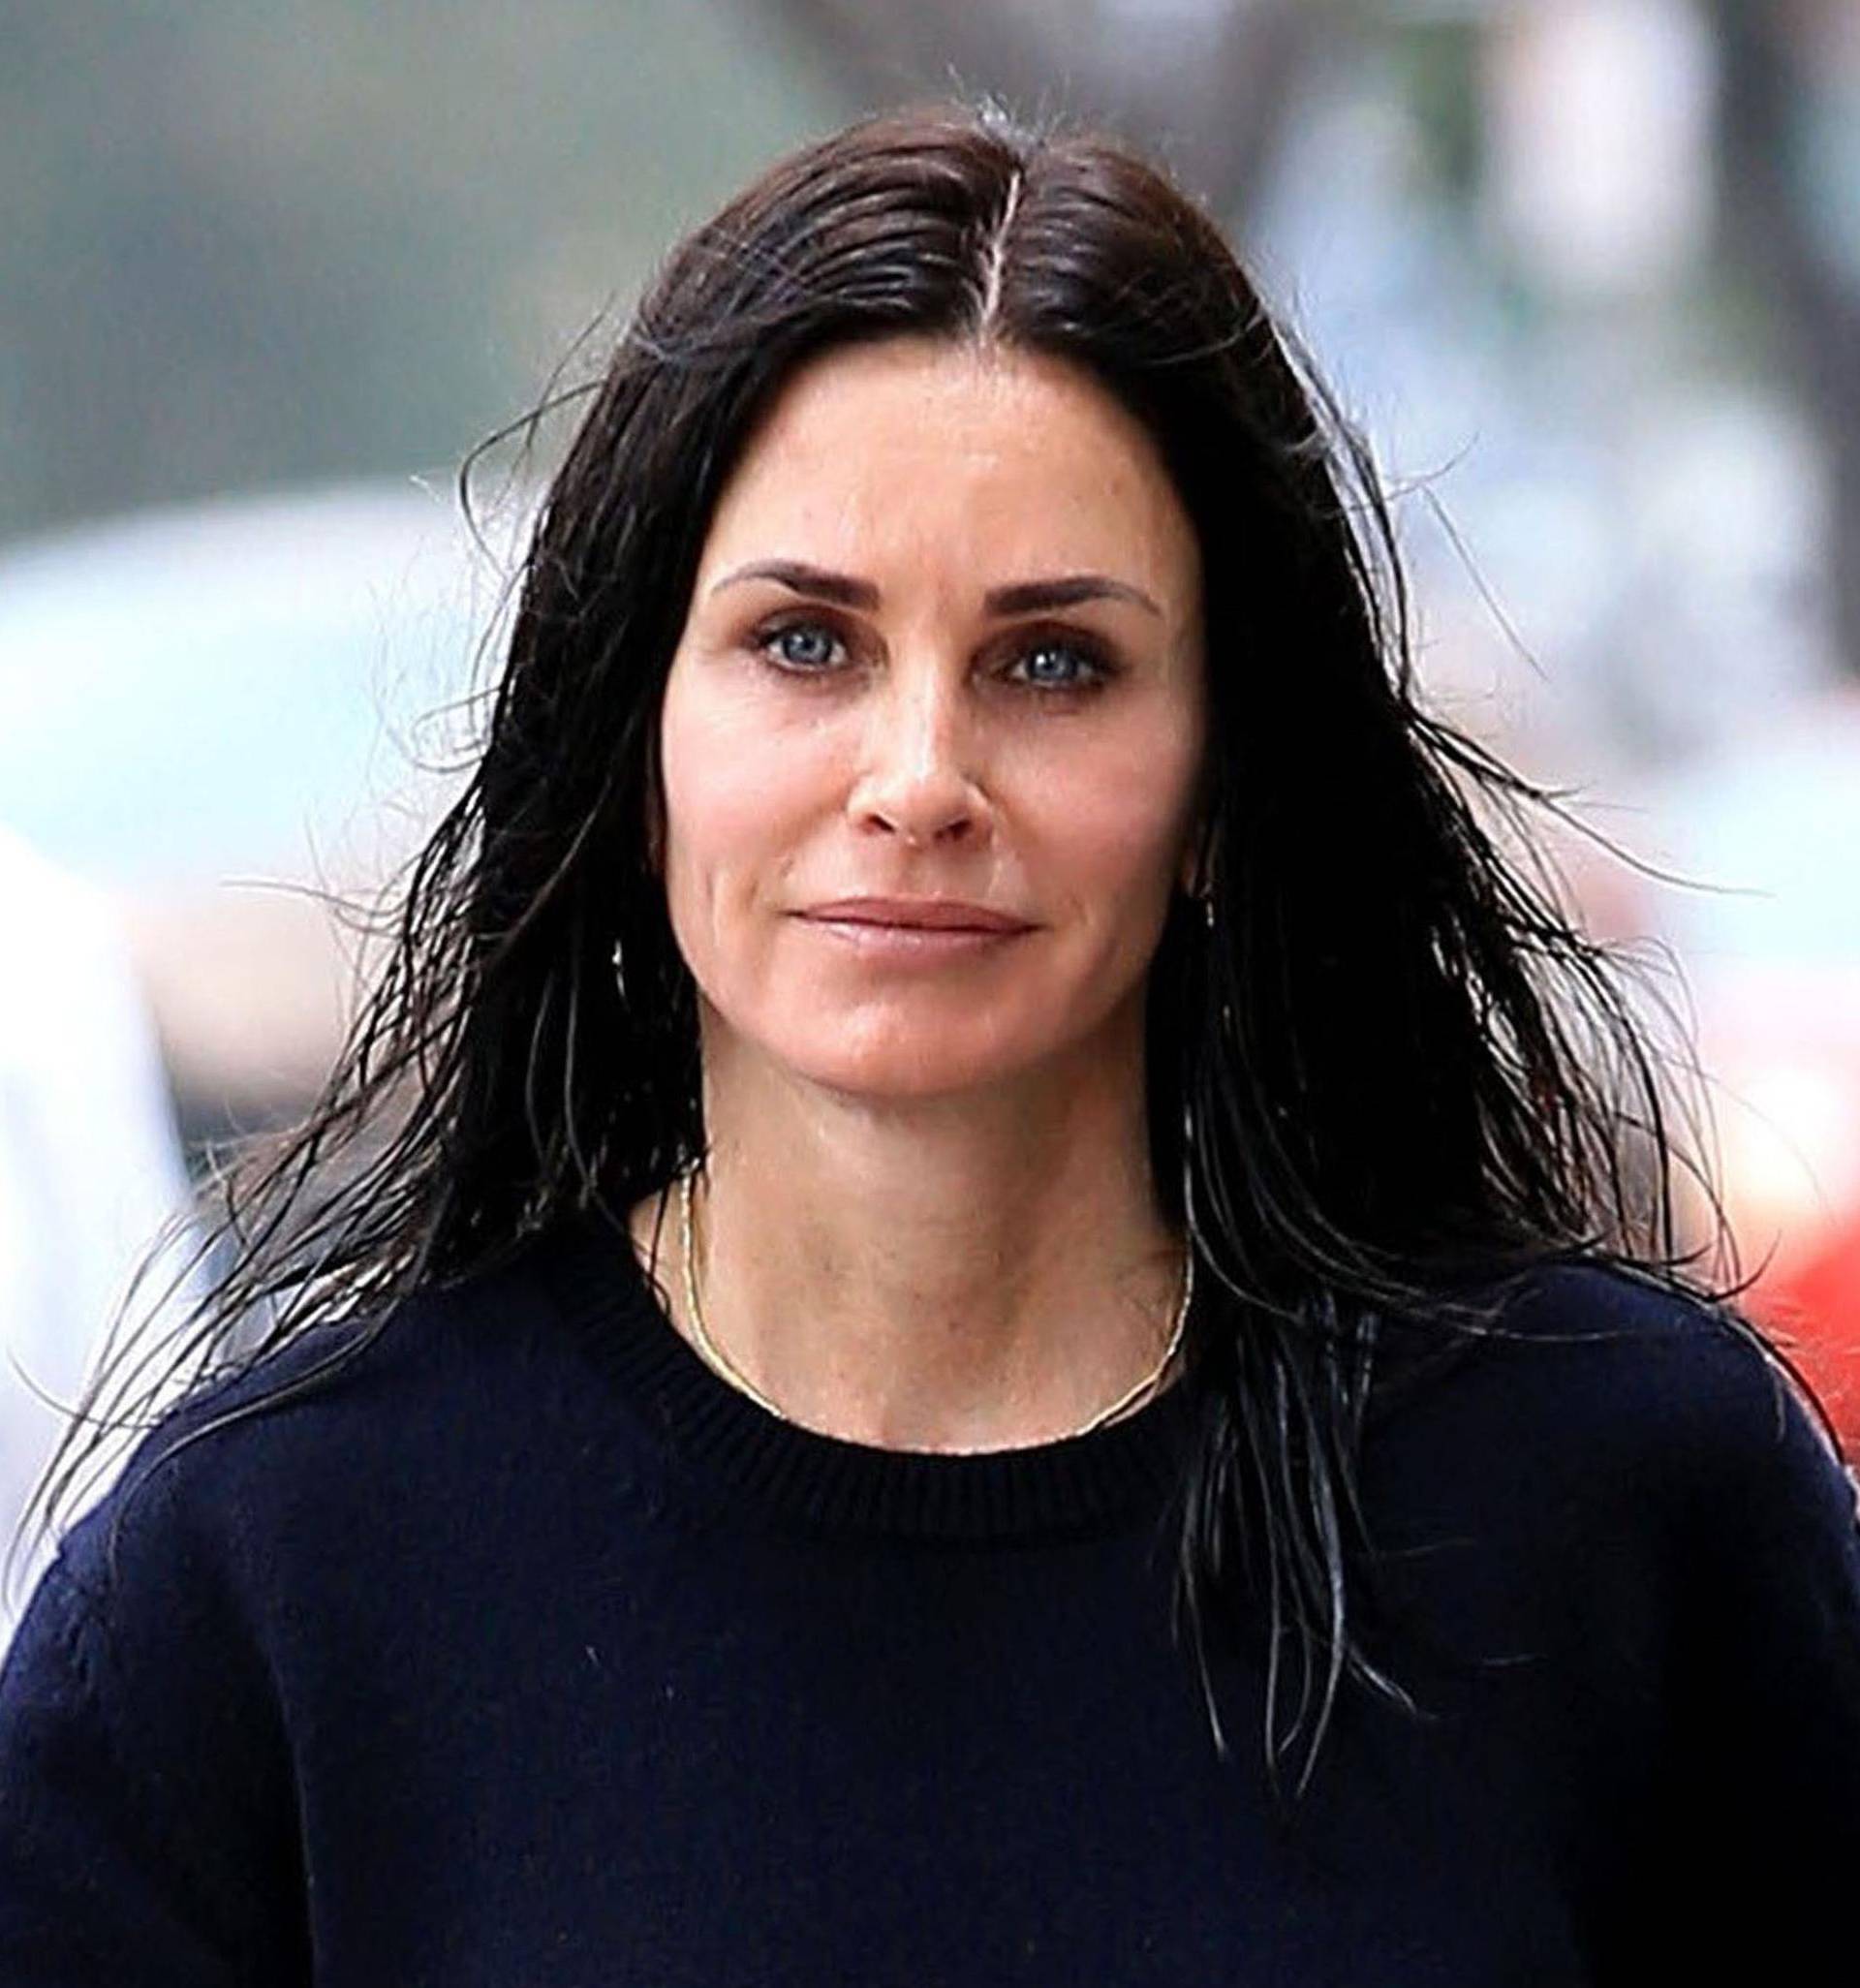 Courteney Cox leaves a hair salon with wet hair in Beverly Hills